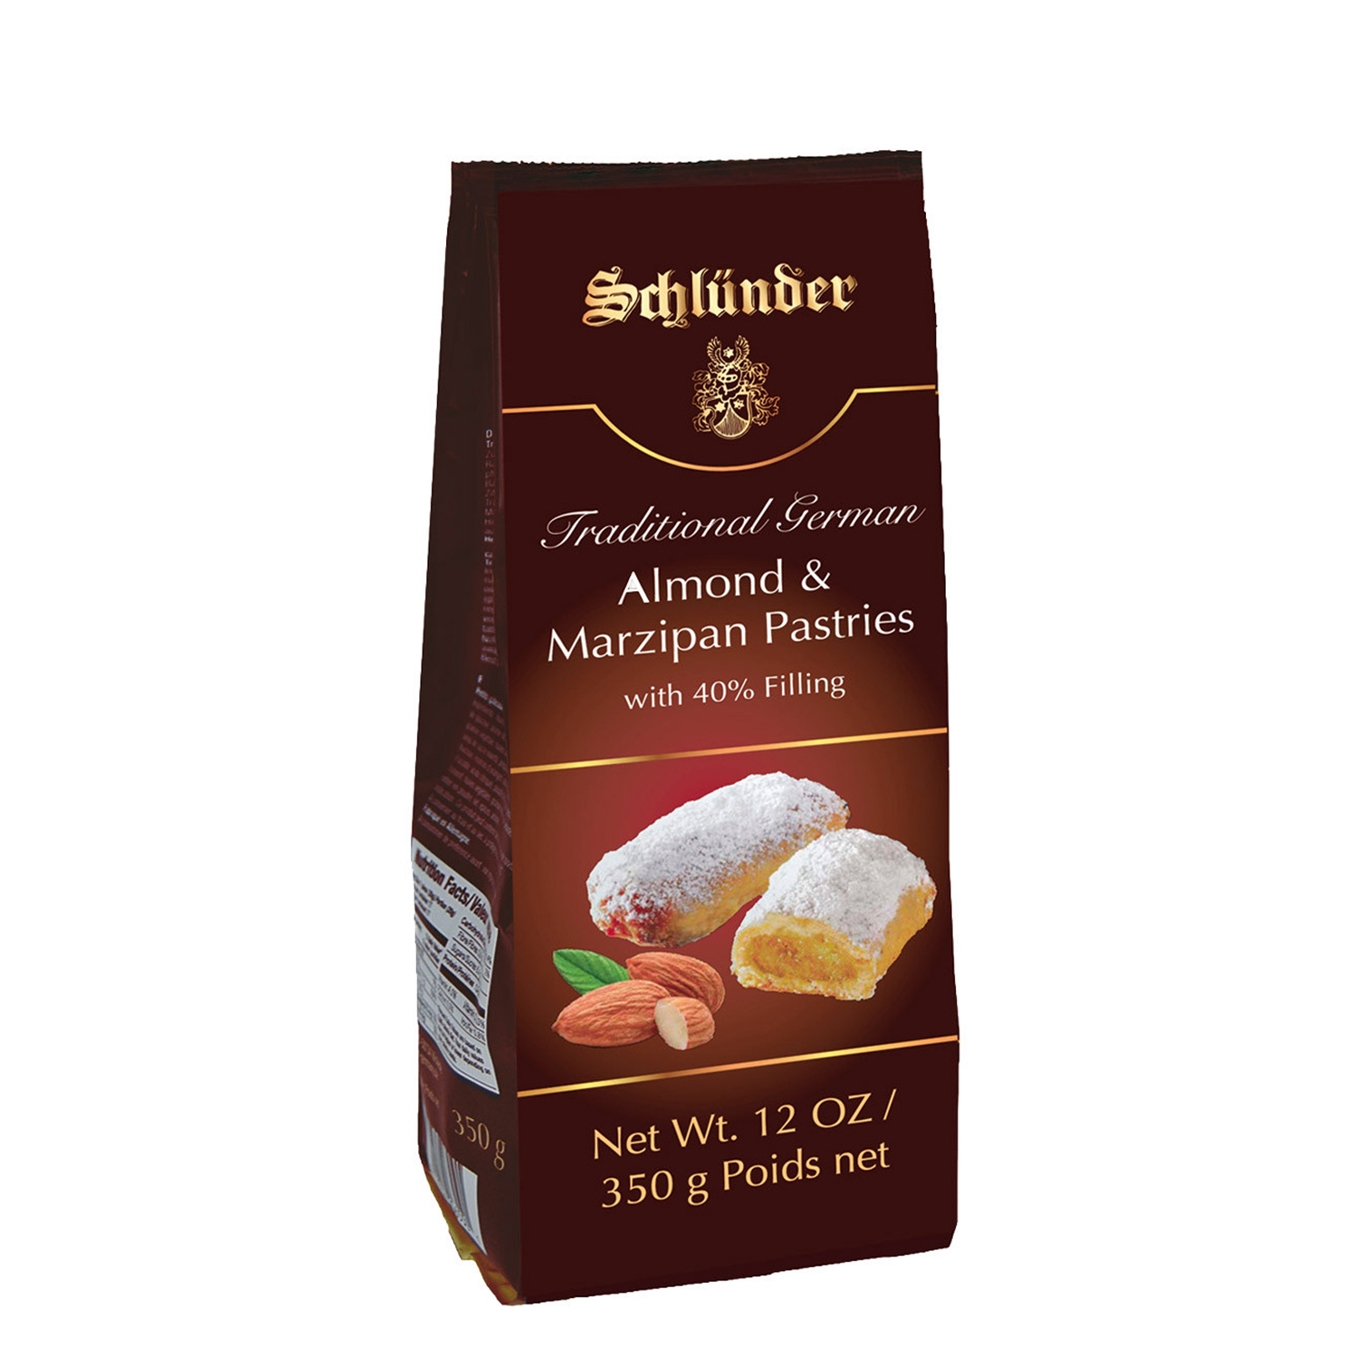 Schlunder Almond & Marzipan Pastries, 350g, Traditional